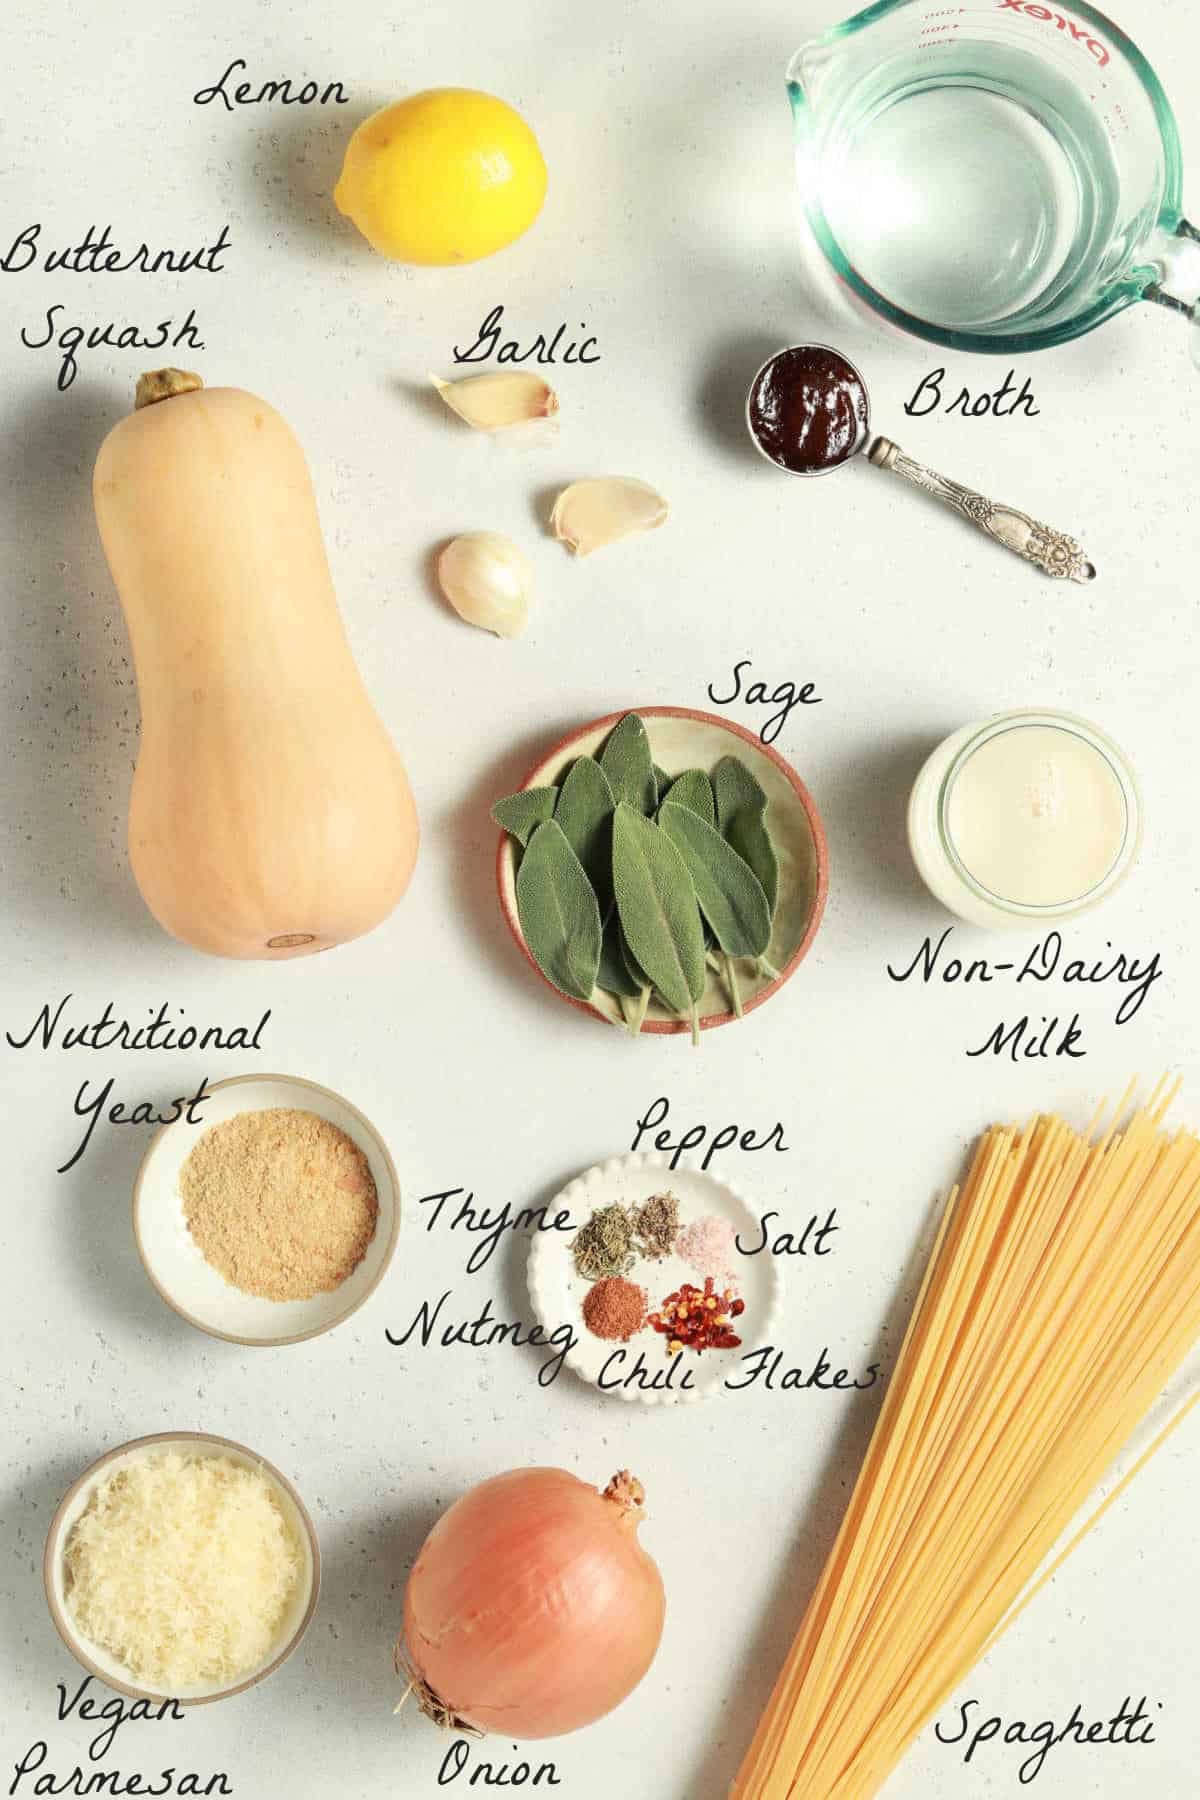 All ingredients needed to make the pasta recipe. 